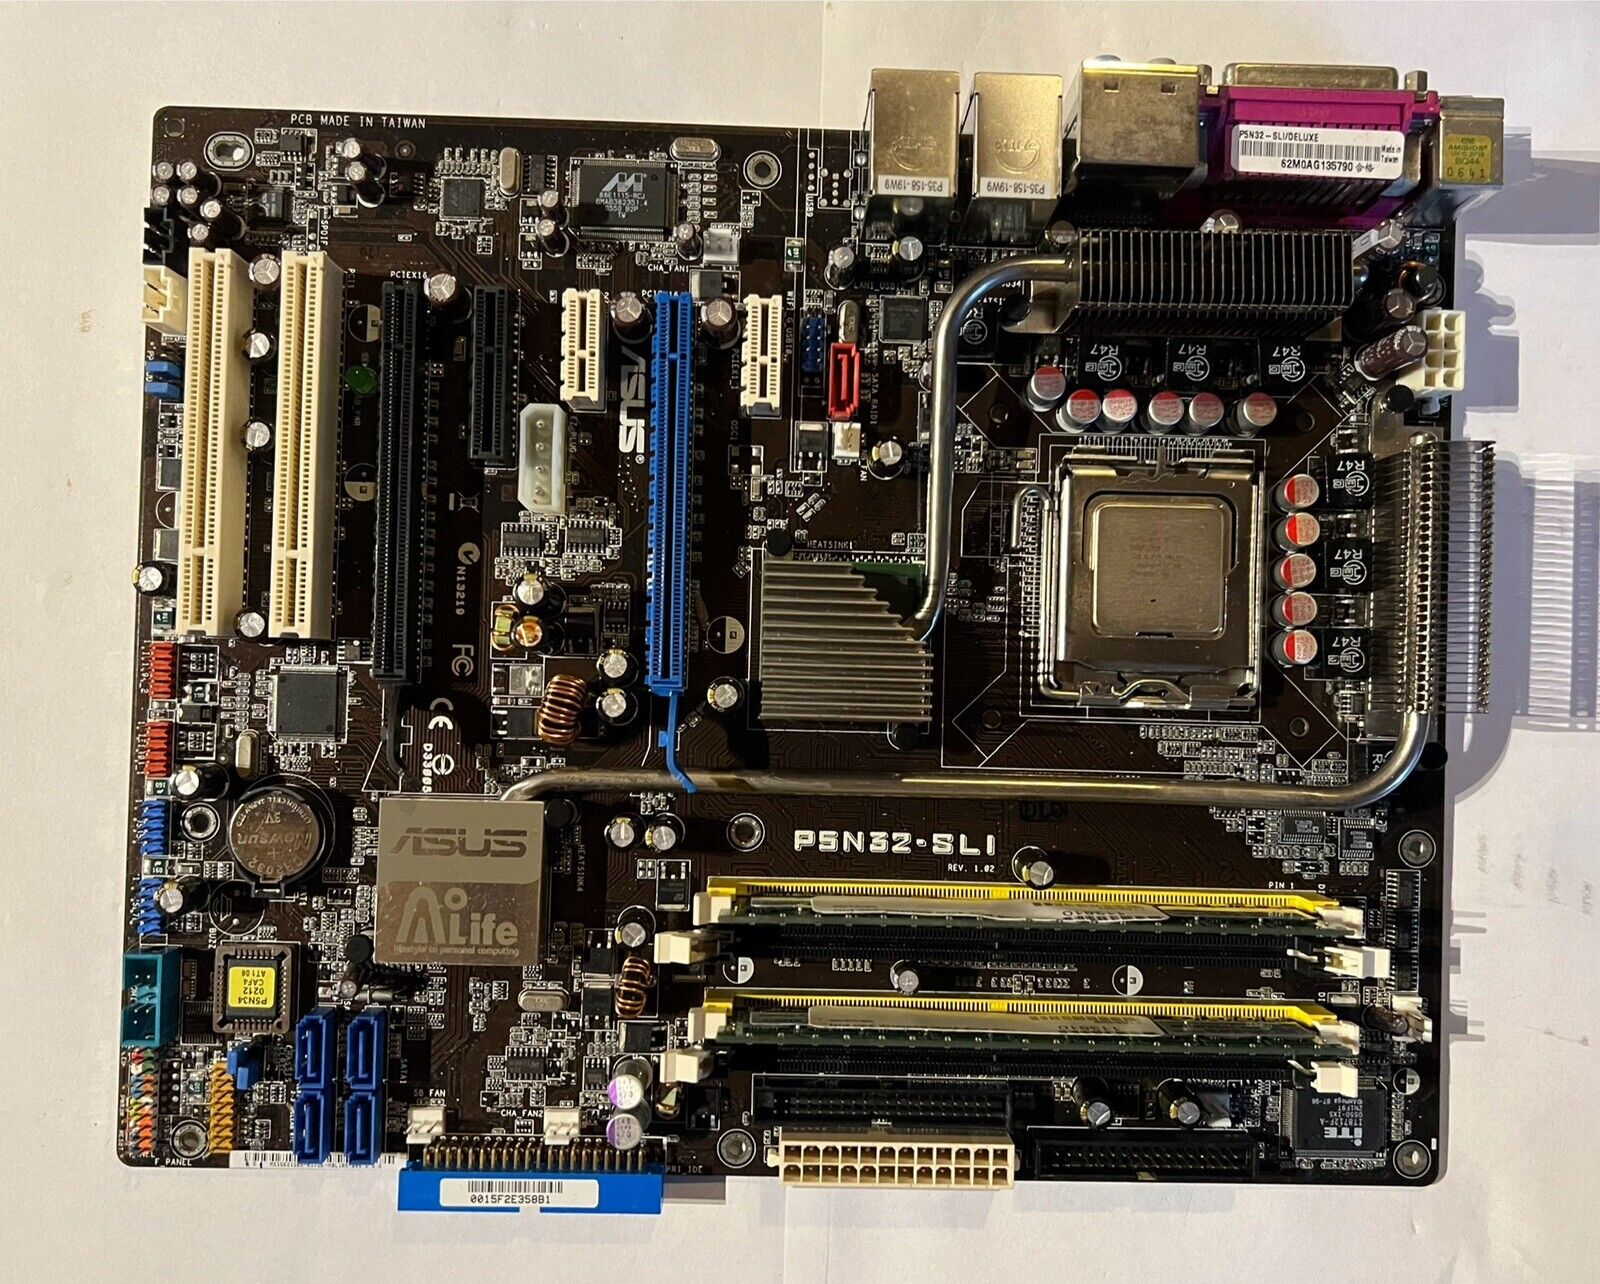 ASUS A8N32-SLI Deluxe, Socket 939, AMD Motherboard - Use For Parts